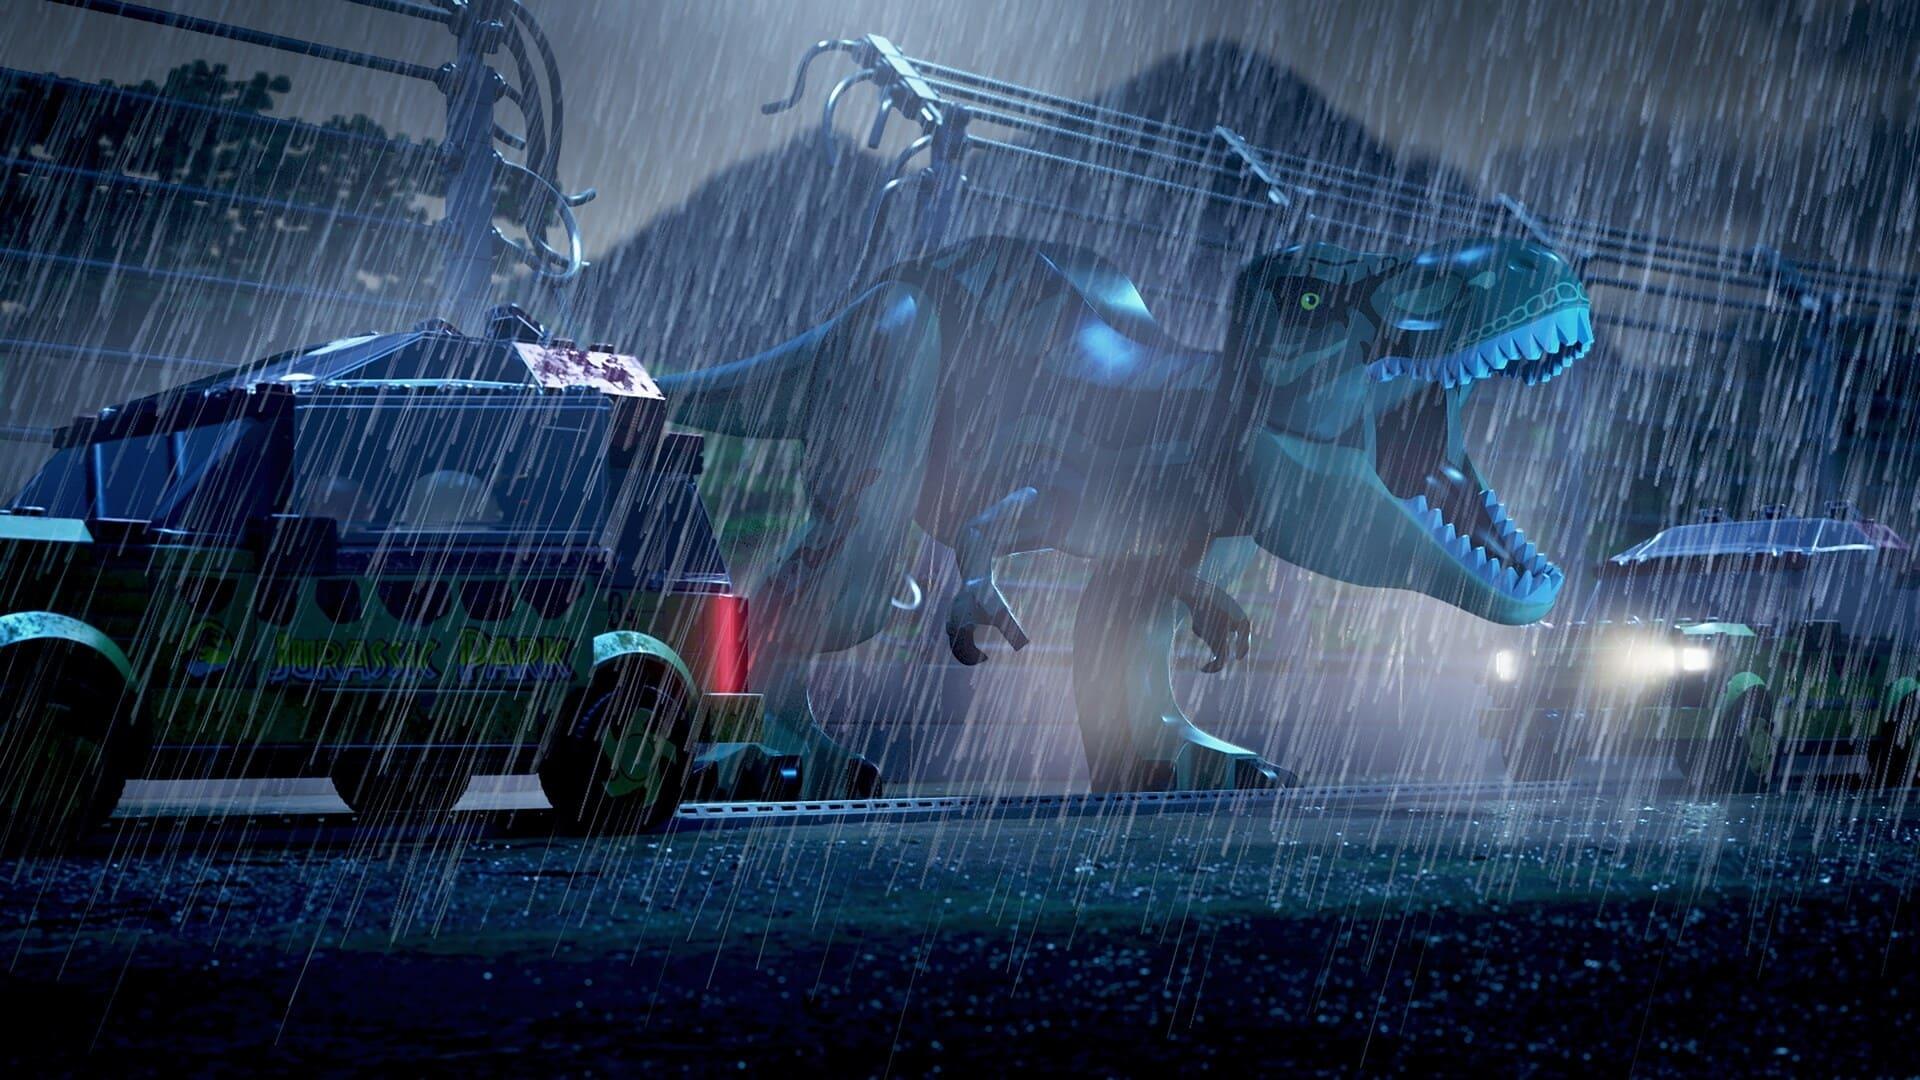 LEGO Jurassic Park: The Unofficial Retelling backdrop